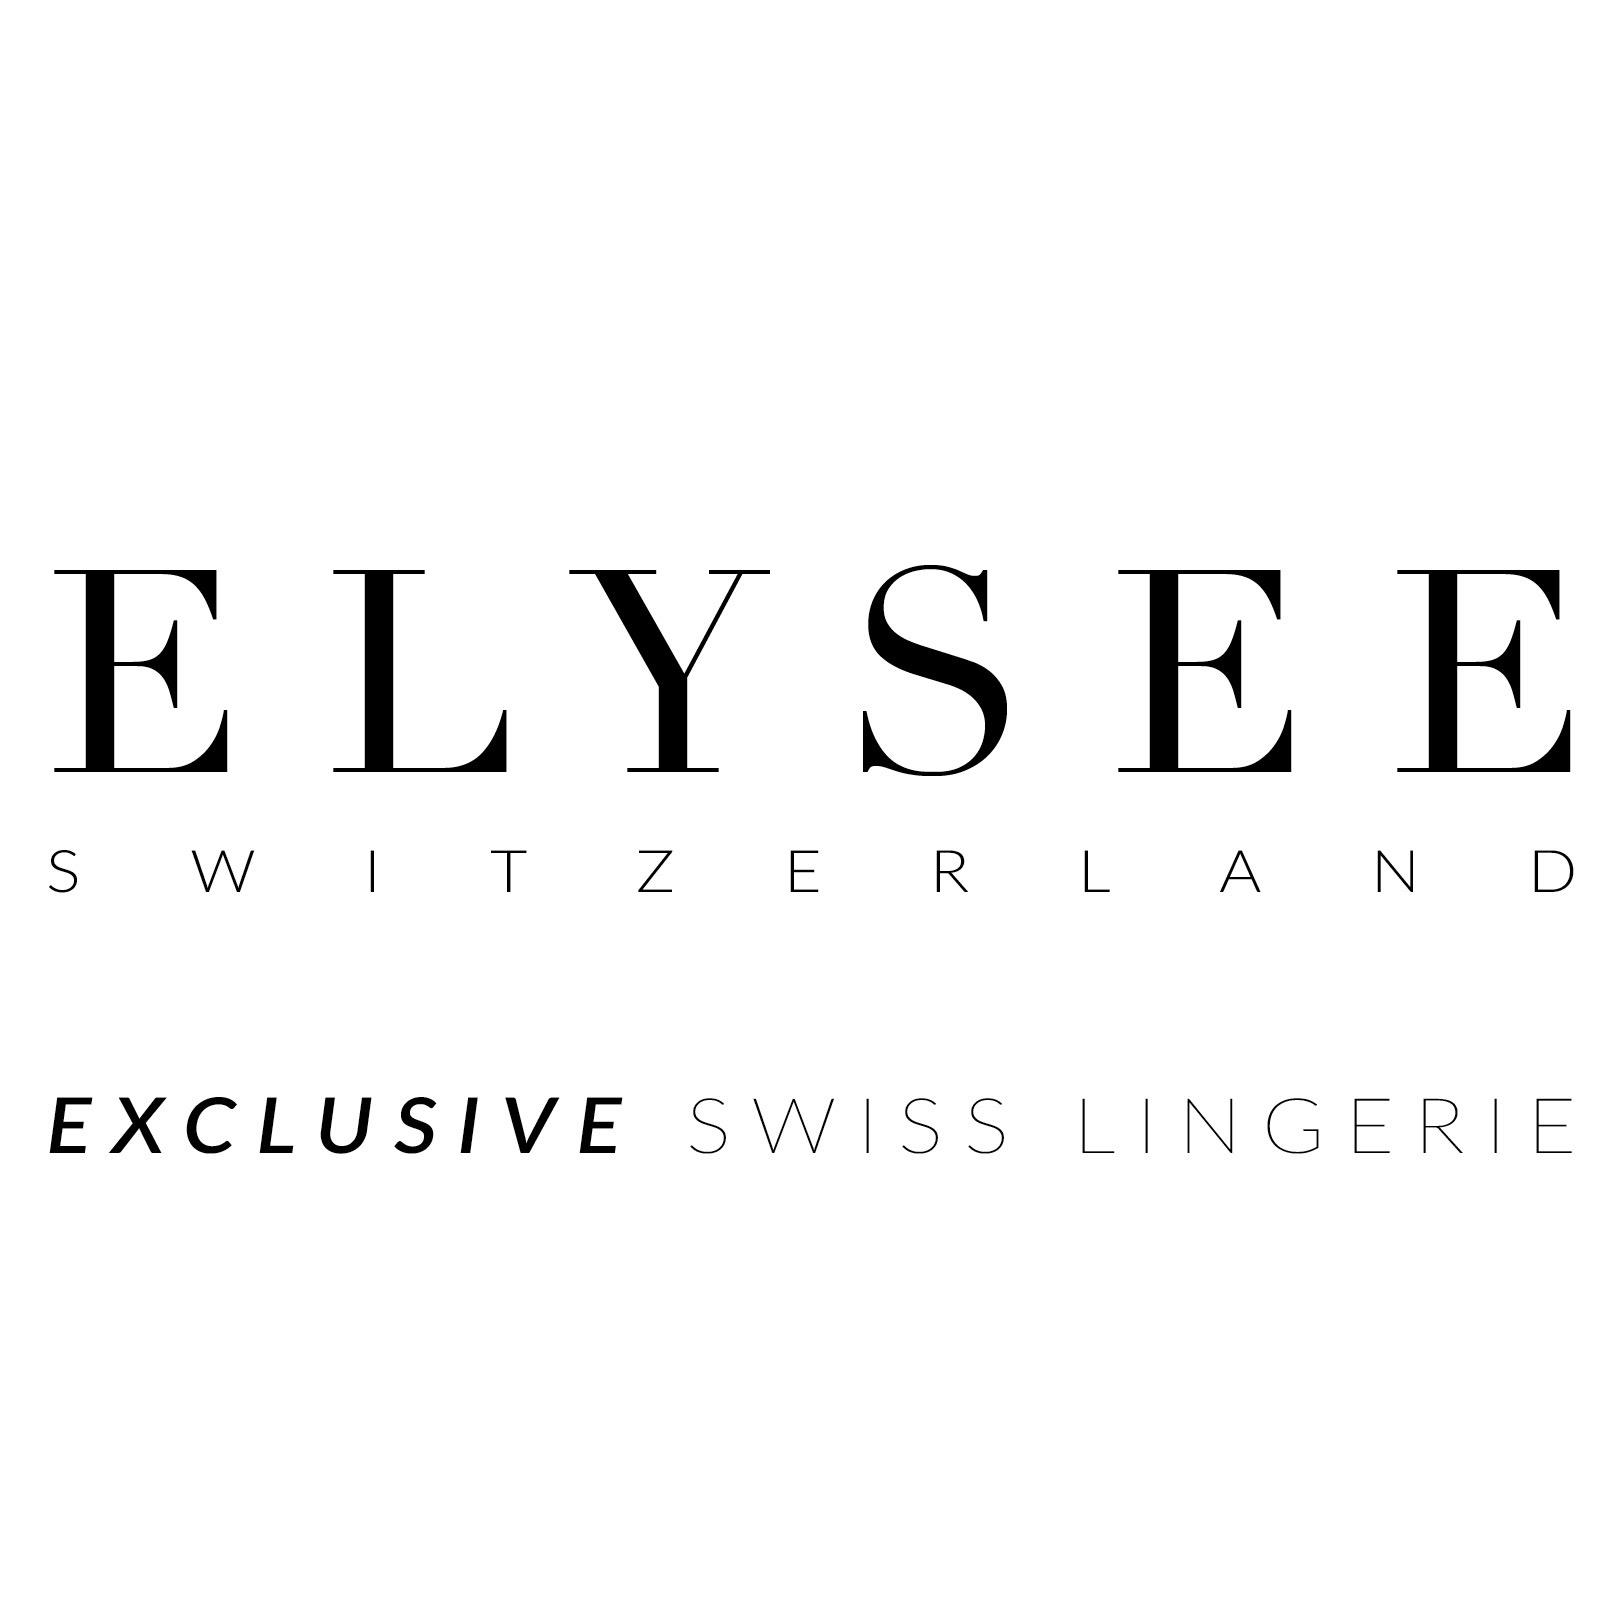 High End Swiss Lingerie Atelier with values of #Creativity #Luxury #Beauty